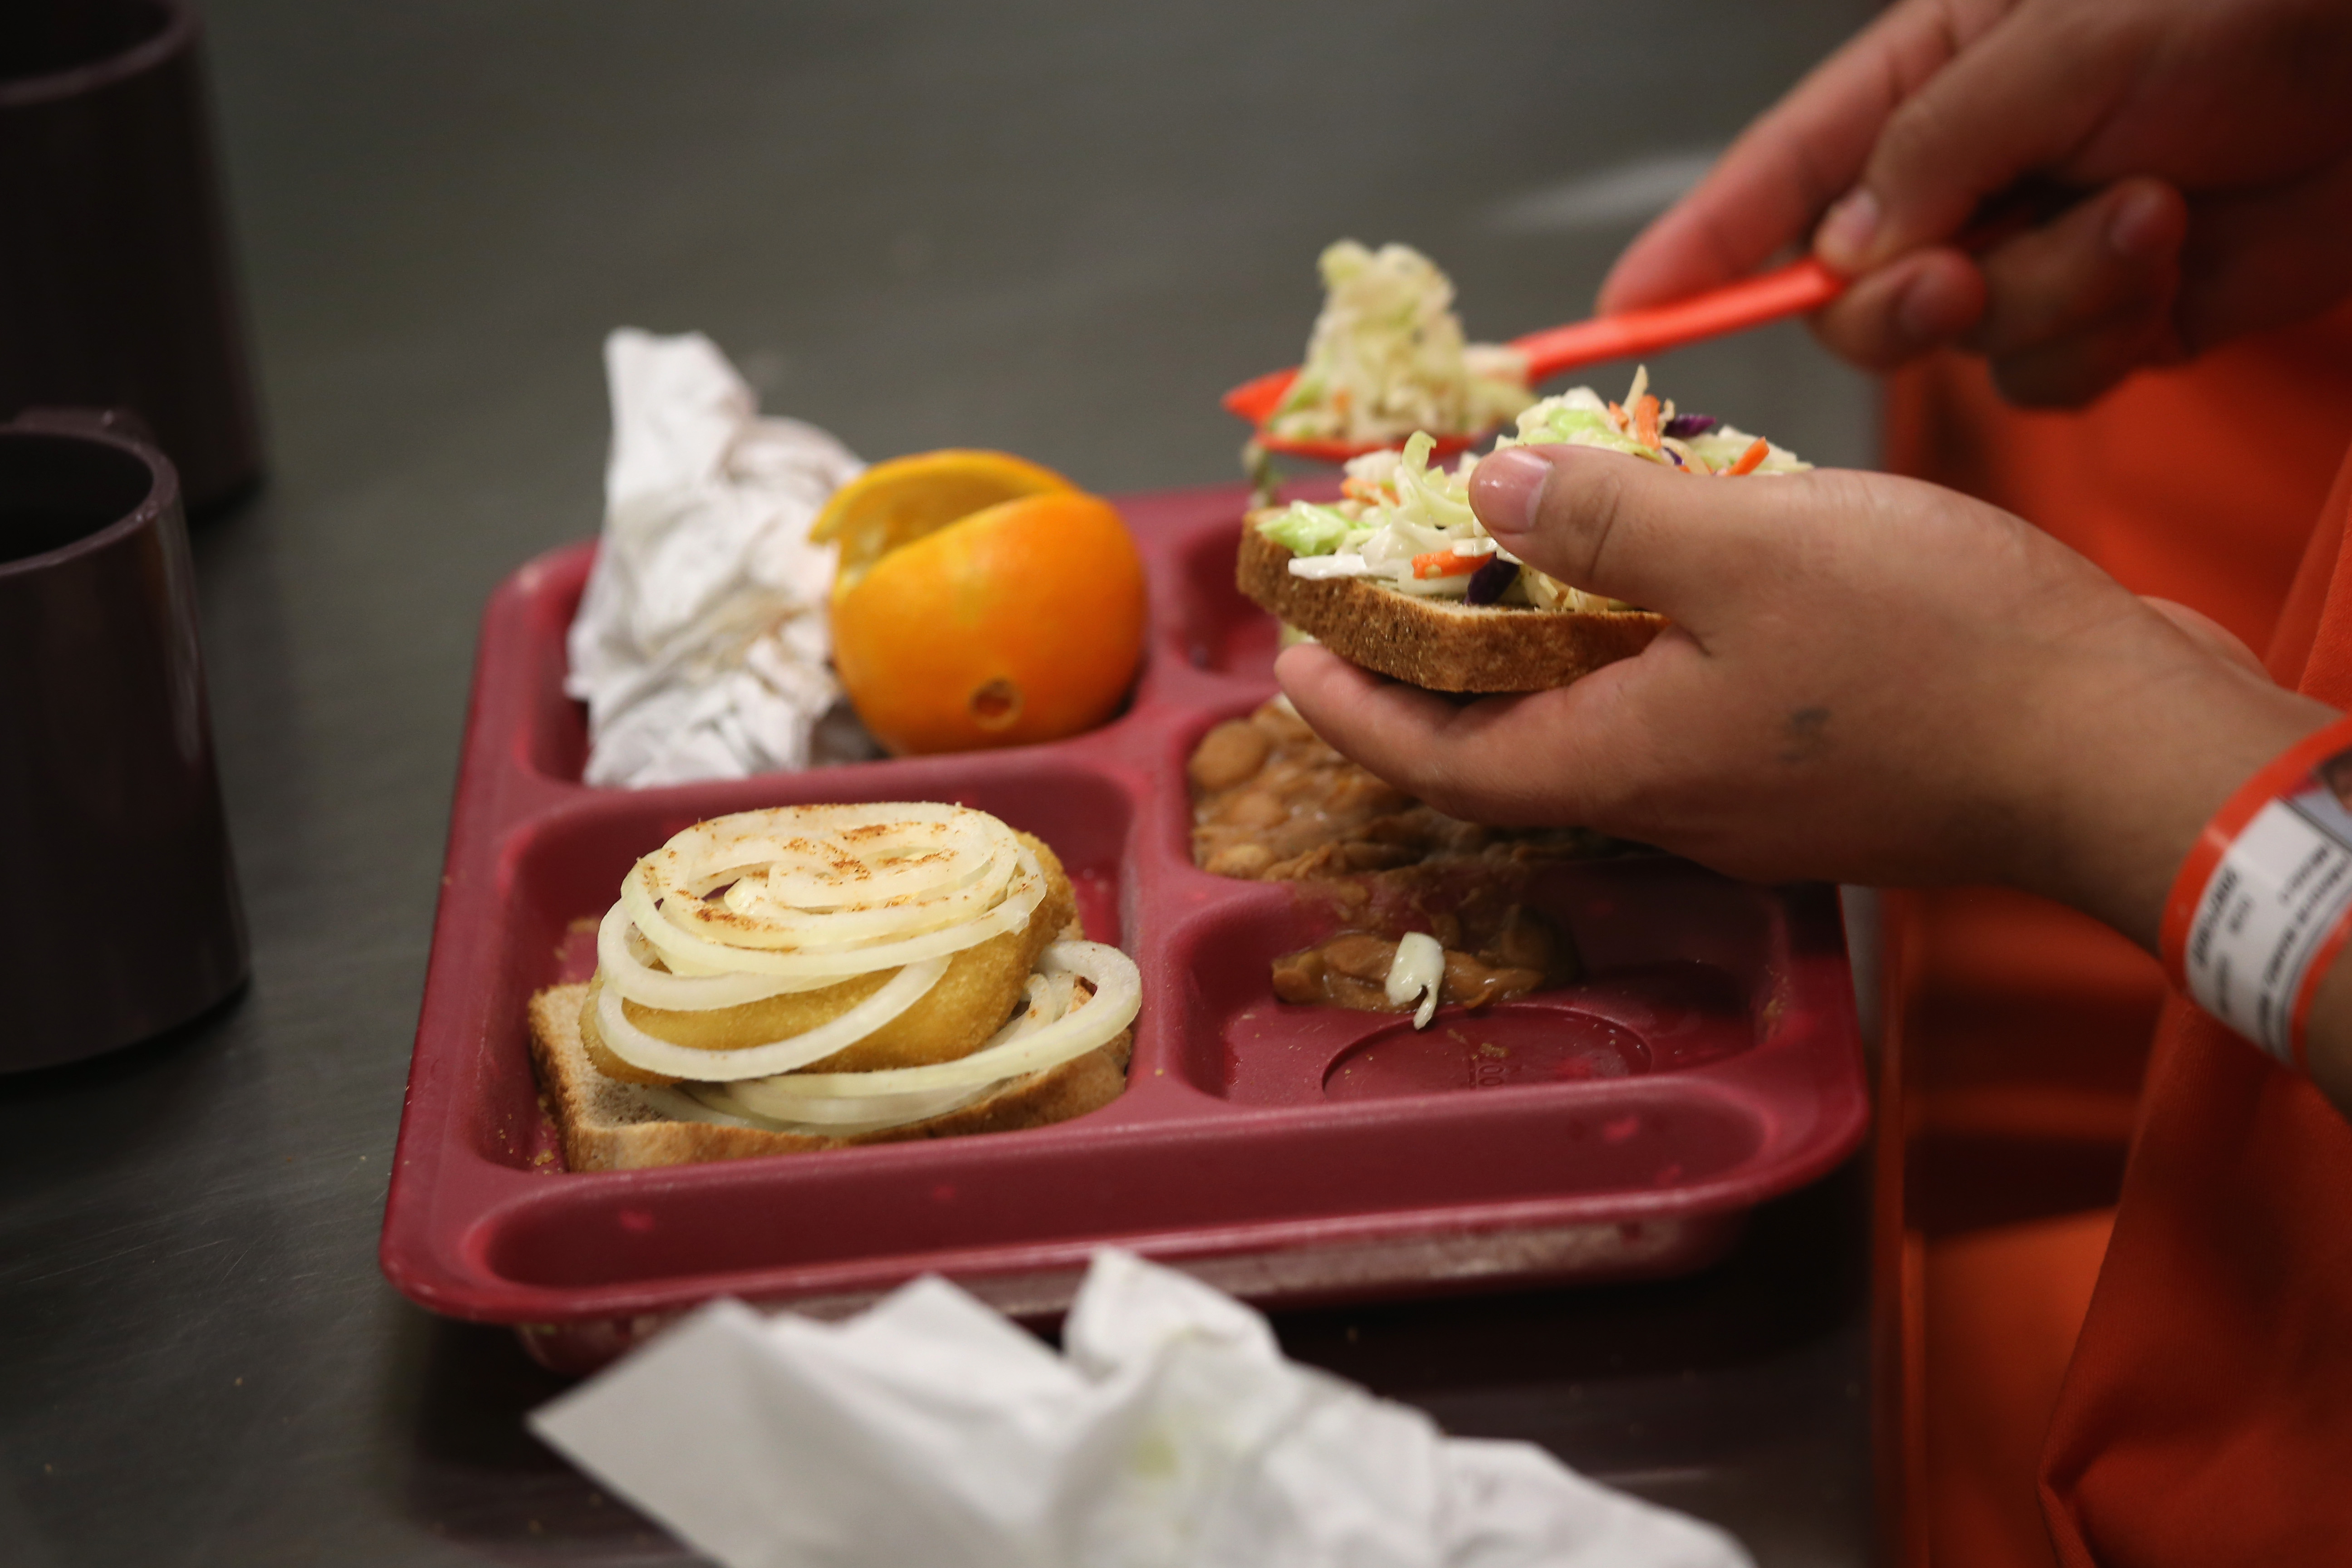 Immigrant detainees eat lunch, one of three meals a day, at the Adelanto Detention Facility on November 15, 2013 in Adelanto, California. (Photo by John Moore/Getty Images)